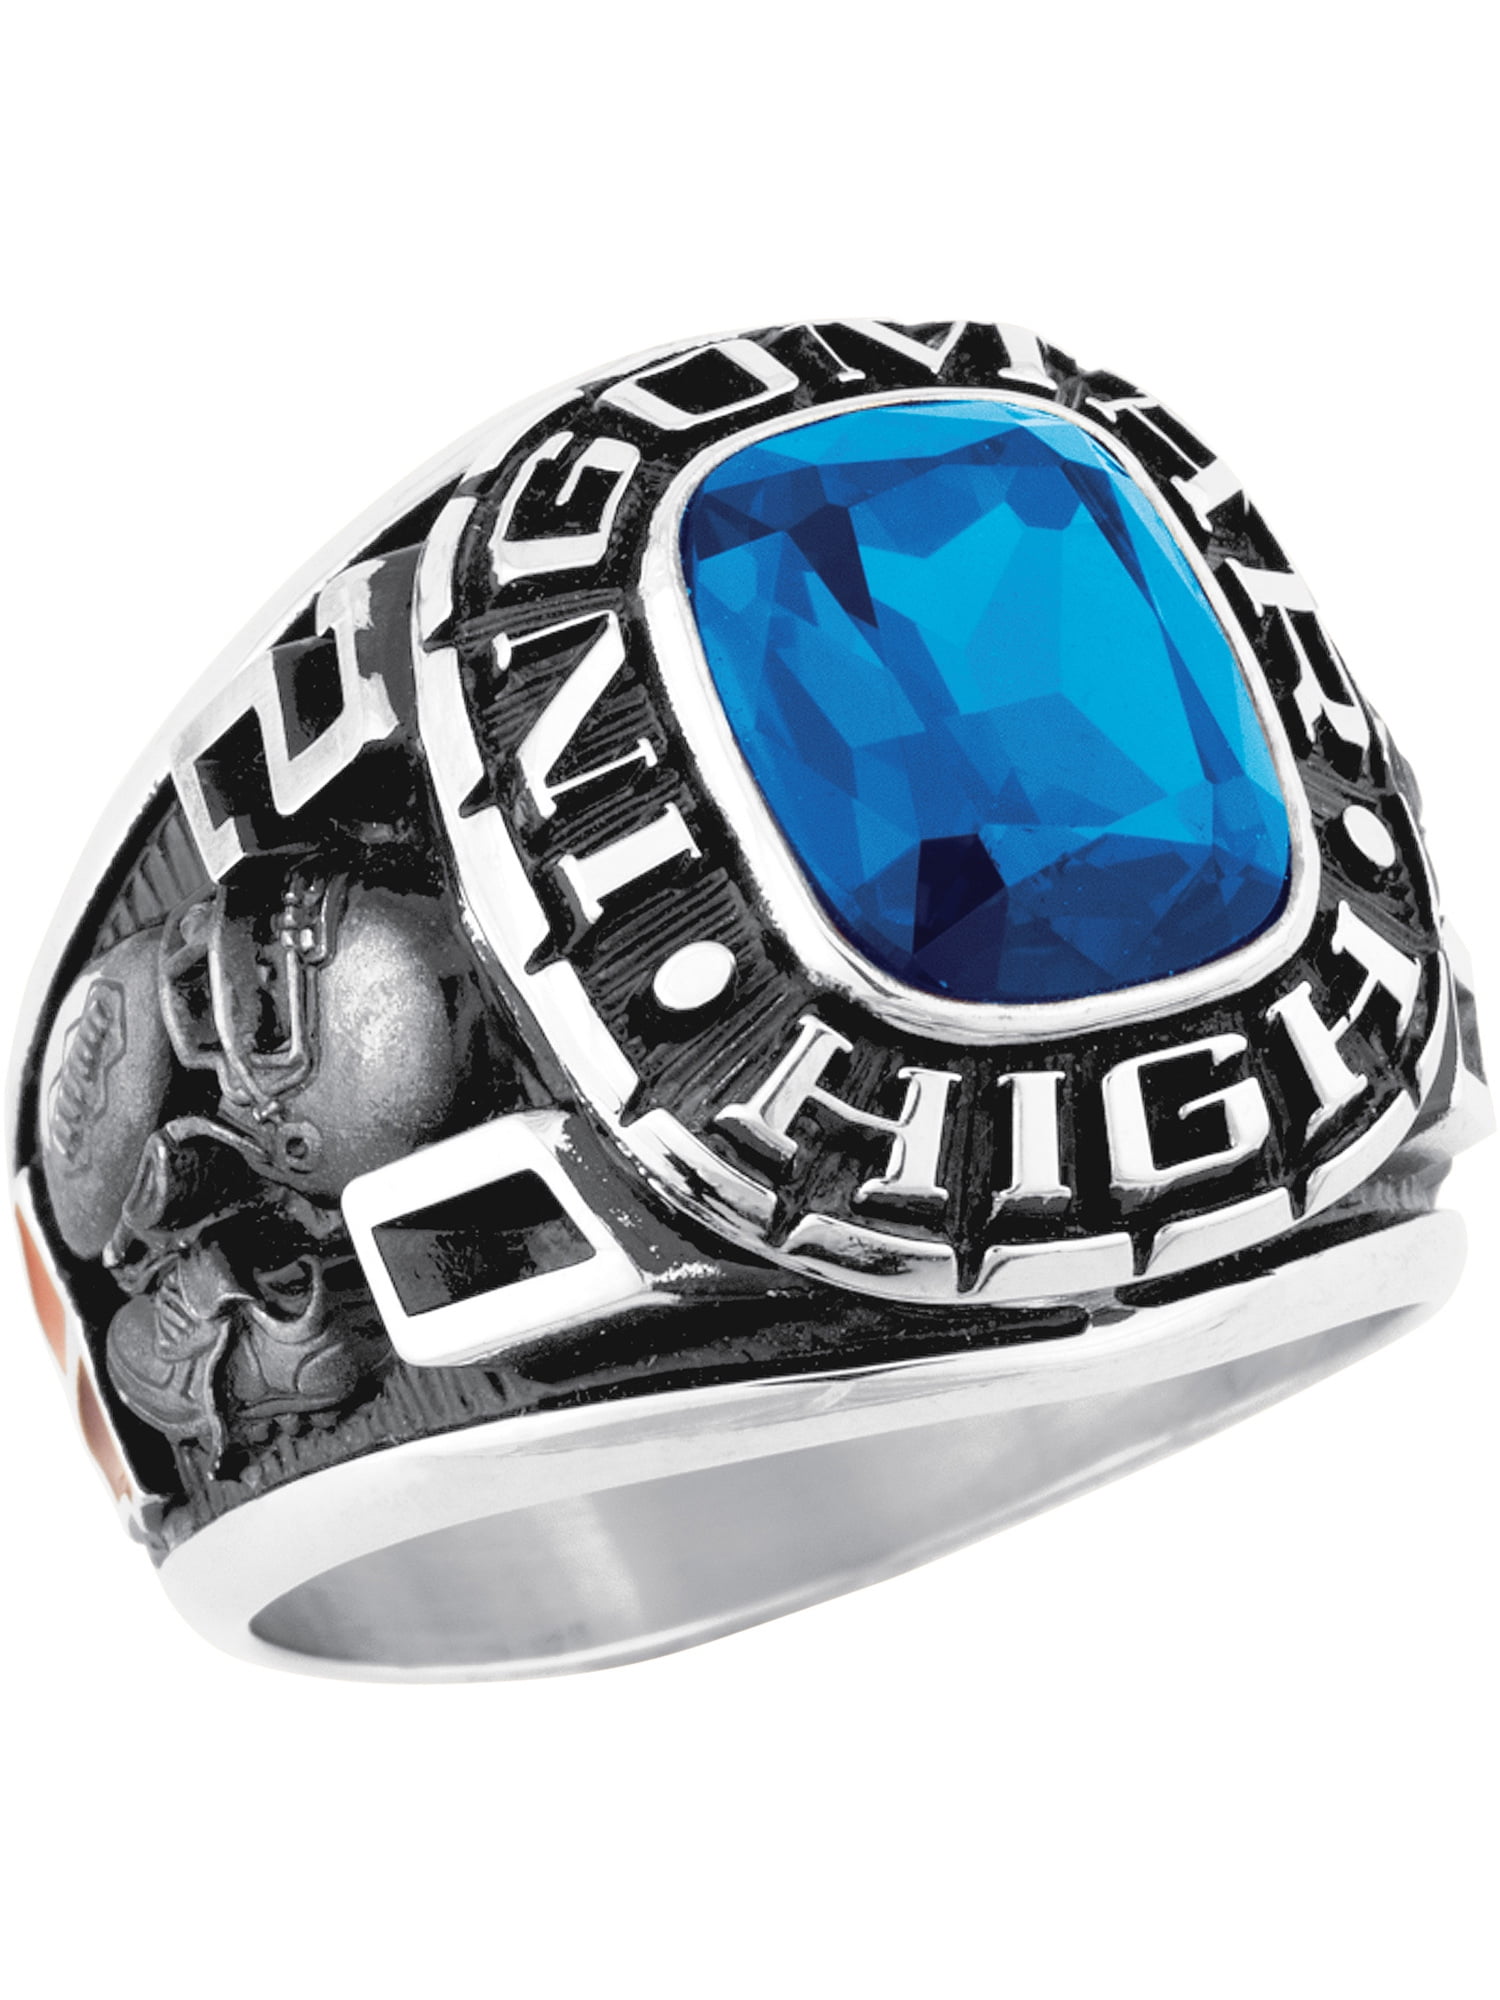 Keepsake - Personalized Men's Classic Square Class Ring available in